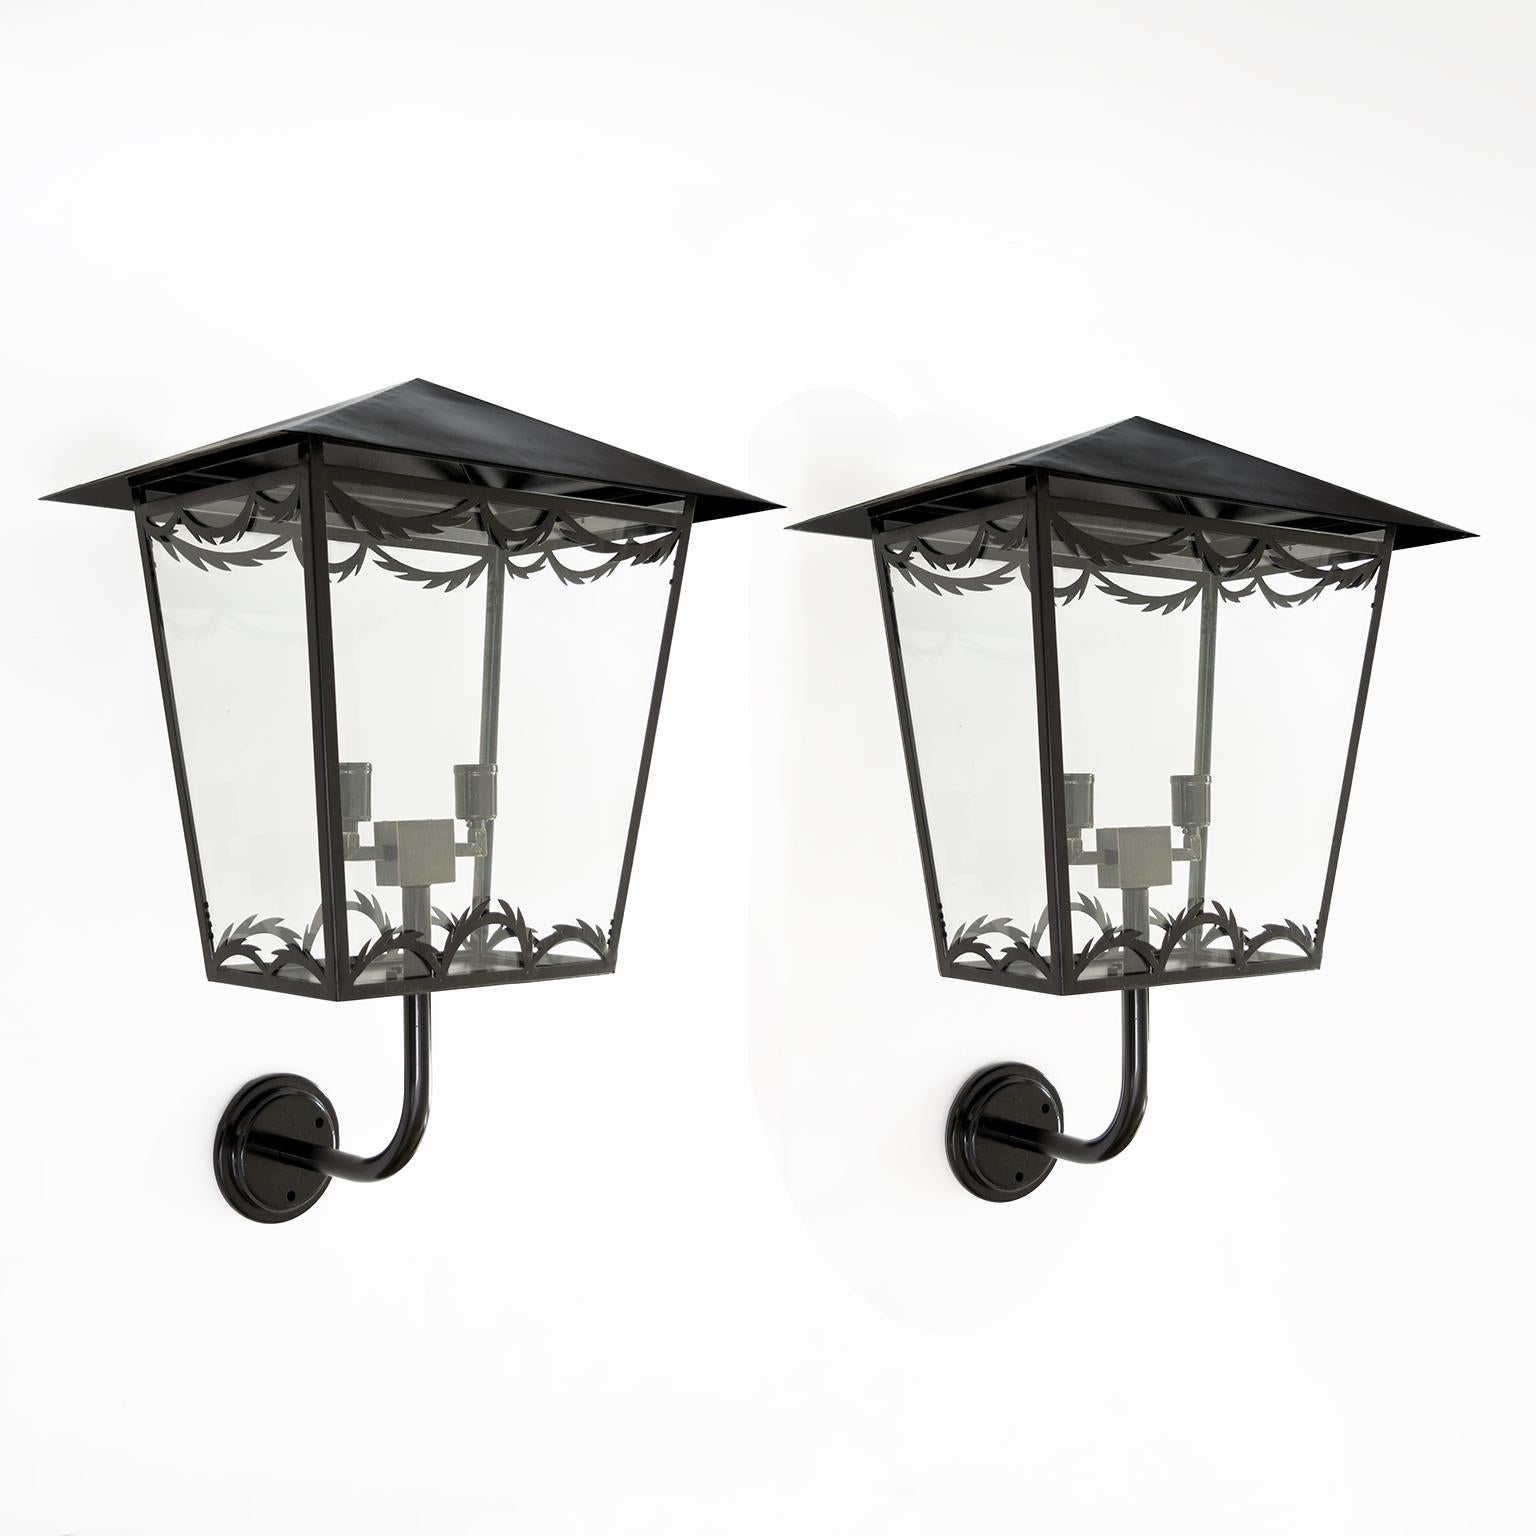 A large pair of Scandinavian midcentury wall-mounted lanterns with glass sides. Each wall lantern has been newly painted and wired with custom patinated brass cluster with double standard base porcelain sockets for use in the USA. The peaked roof